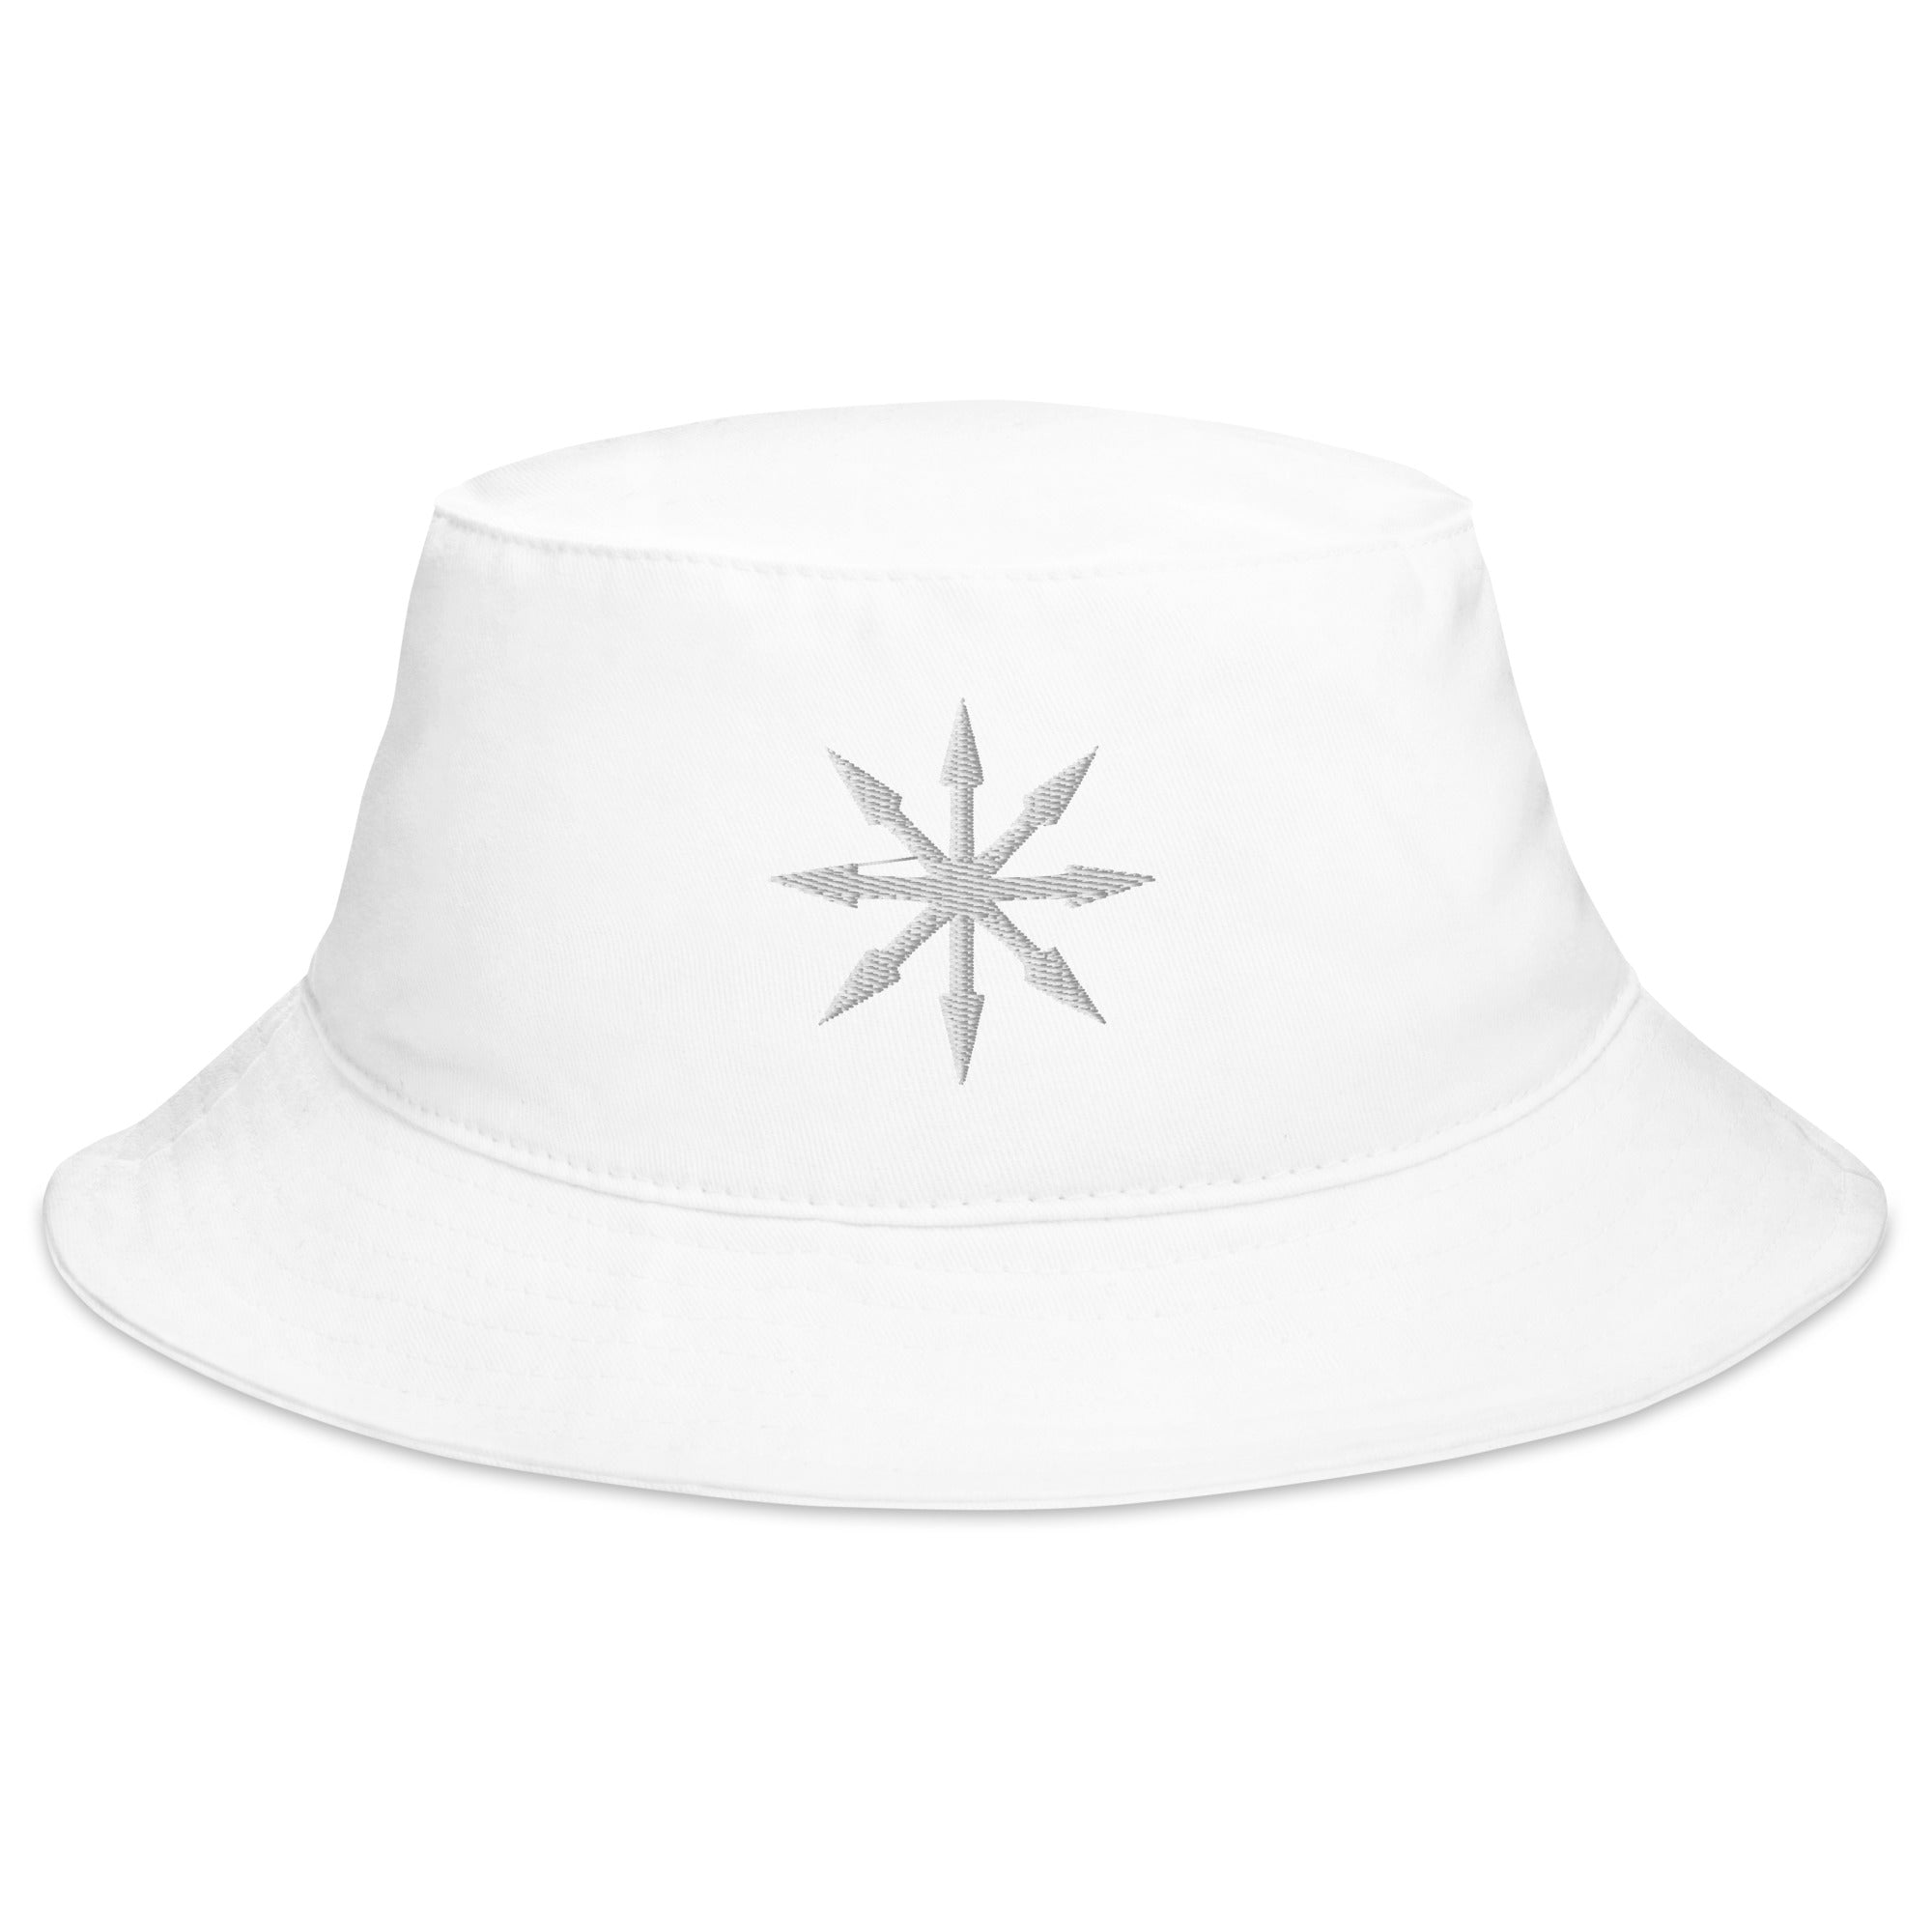 The Symbol of Chaos Embroidered Bucket Hat